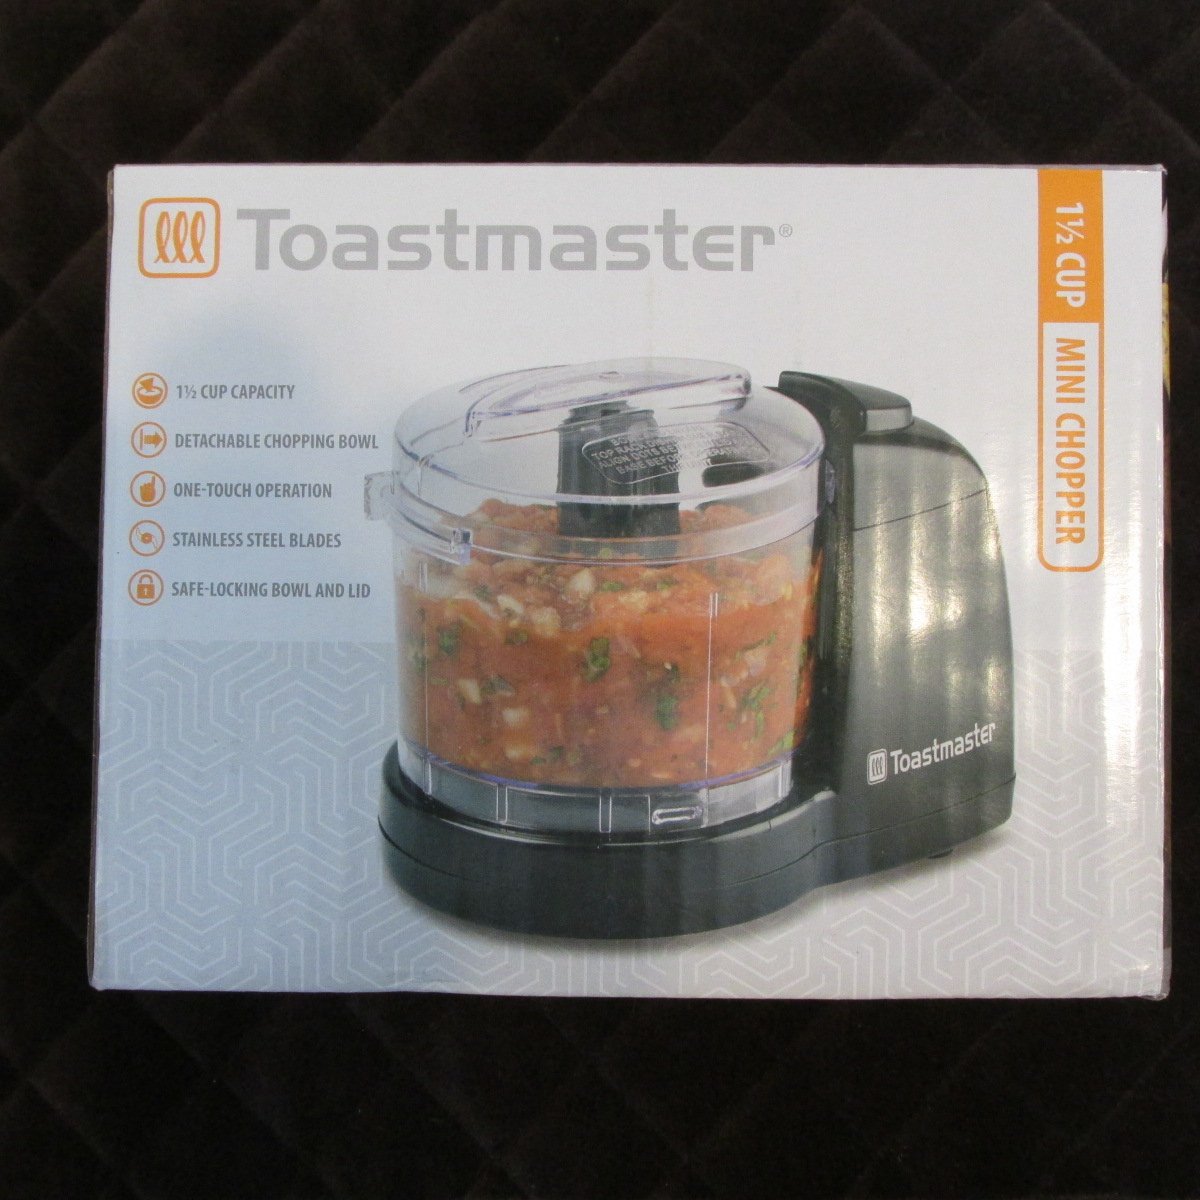 toastmaster-mini-chopper-electric-1-1-2-cup-capacity-food-processor-new